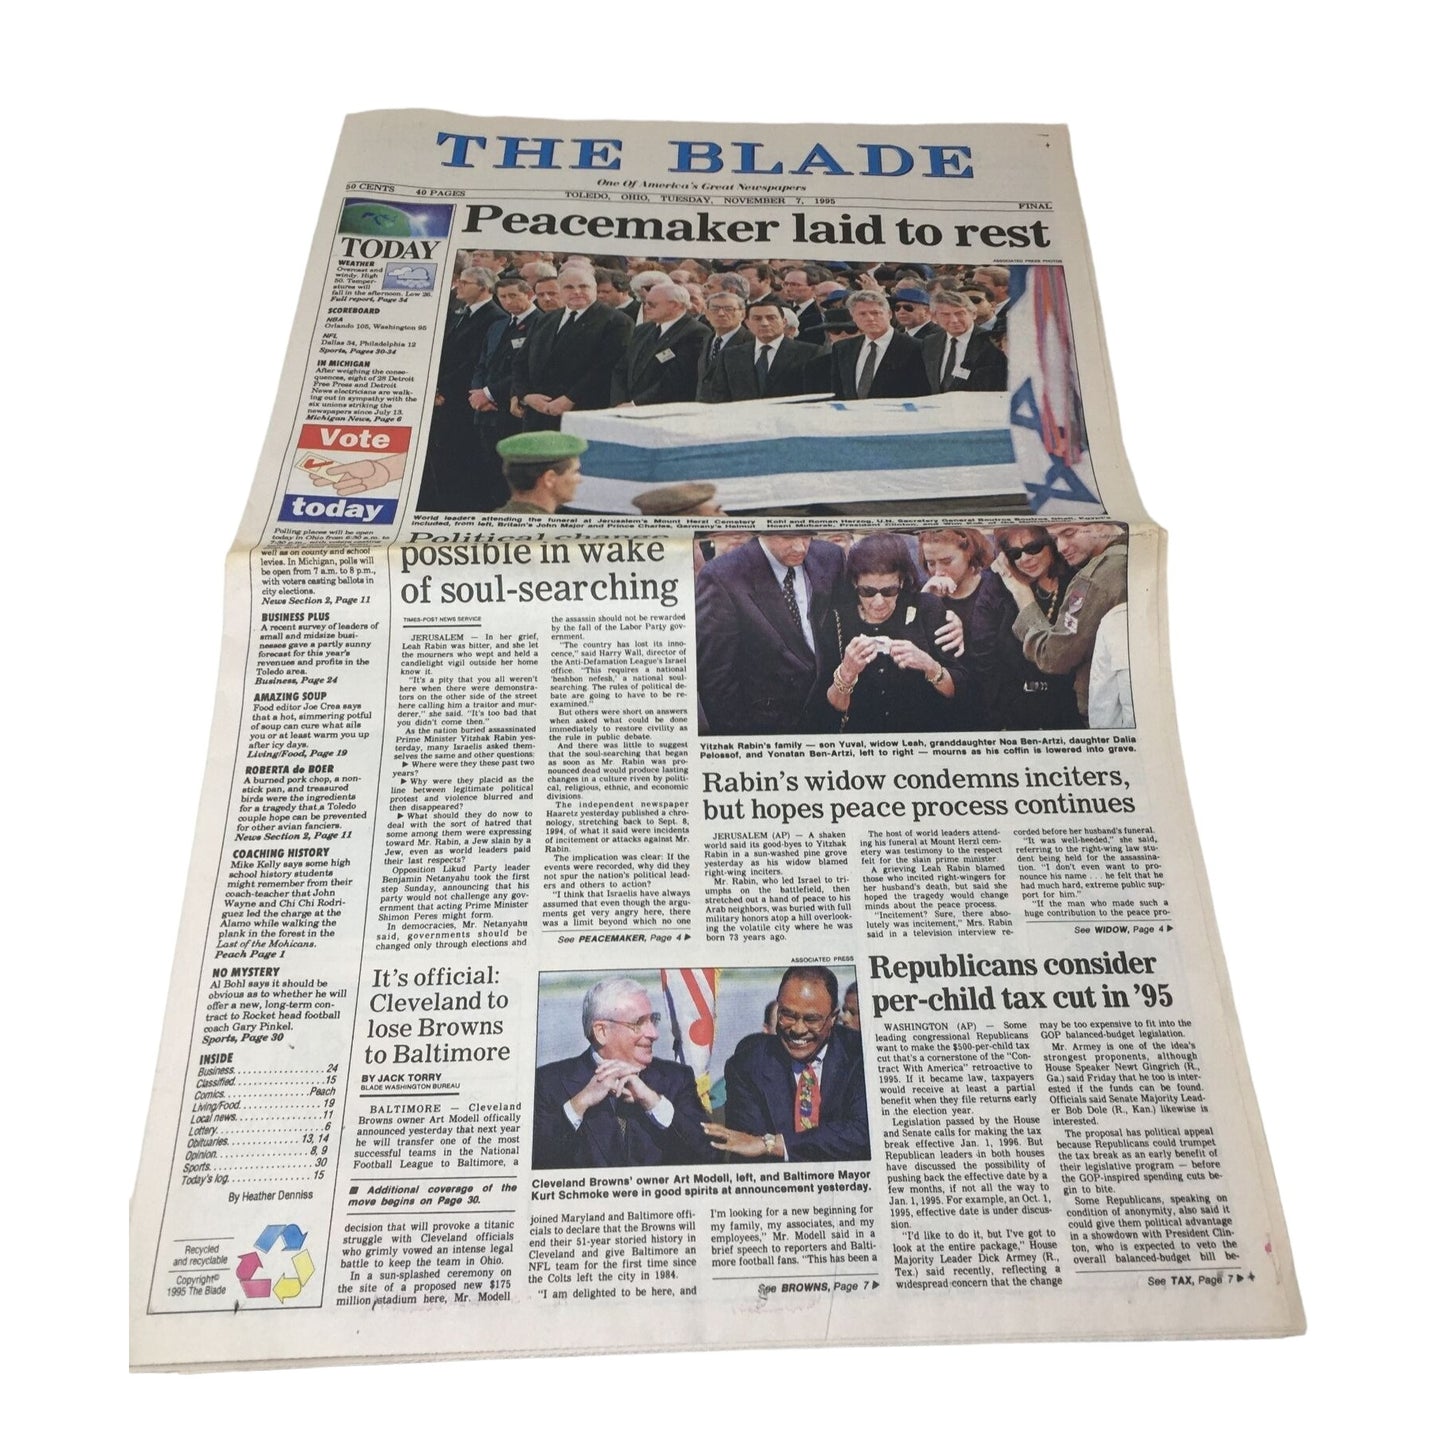 Vintage Collectible Newspaper "The Blade" November 7, 1995